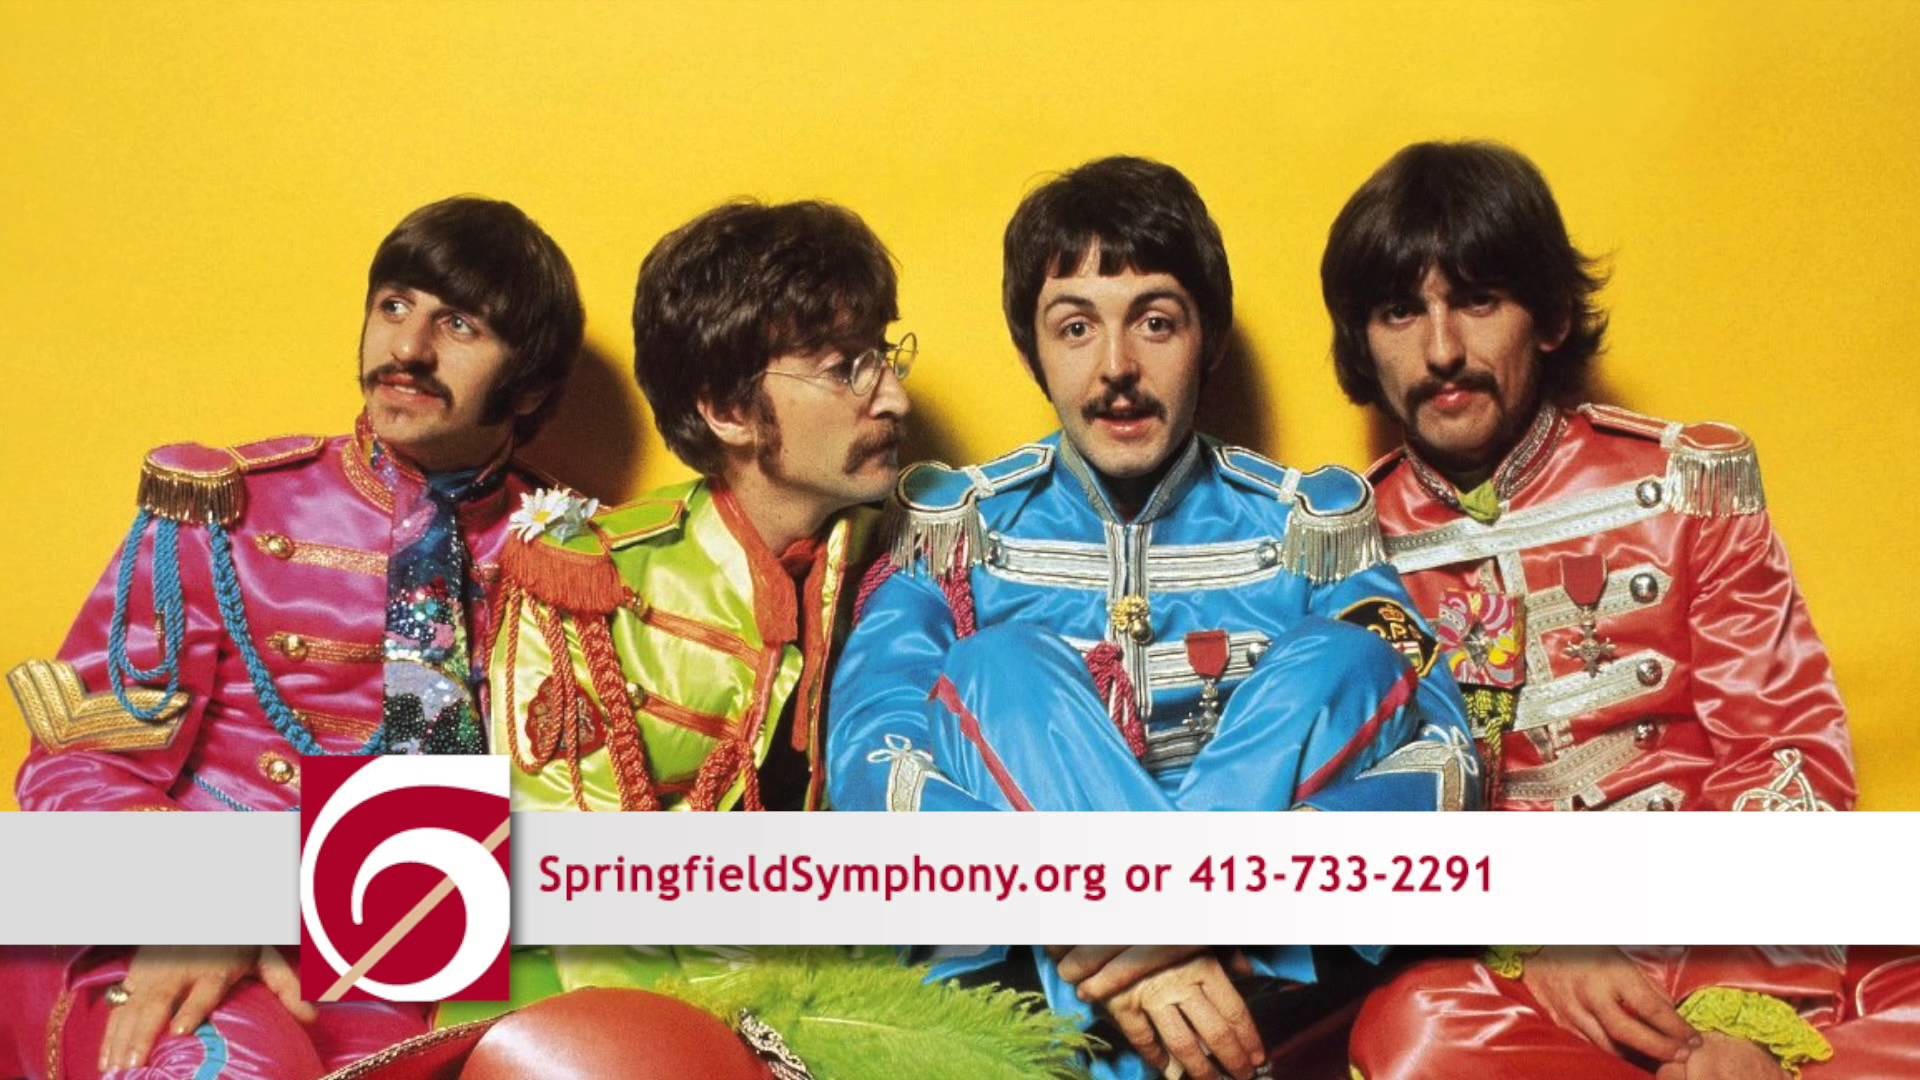 1920x1080 Jeans 'n Classics - Sgt. Pepper / The Beatles with Springfield Symphony  Orchestra - YouTube